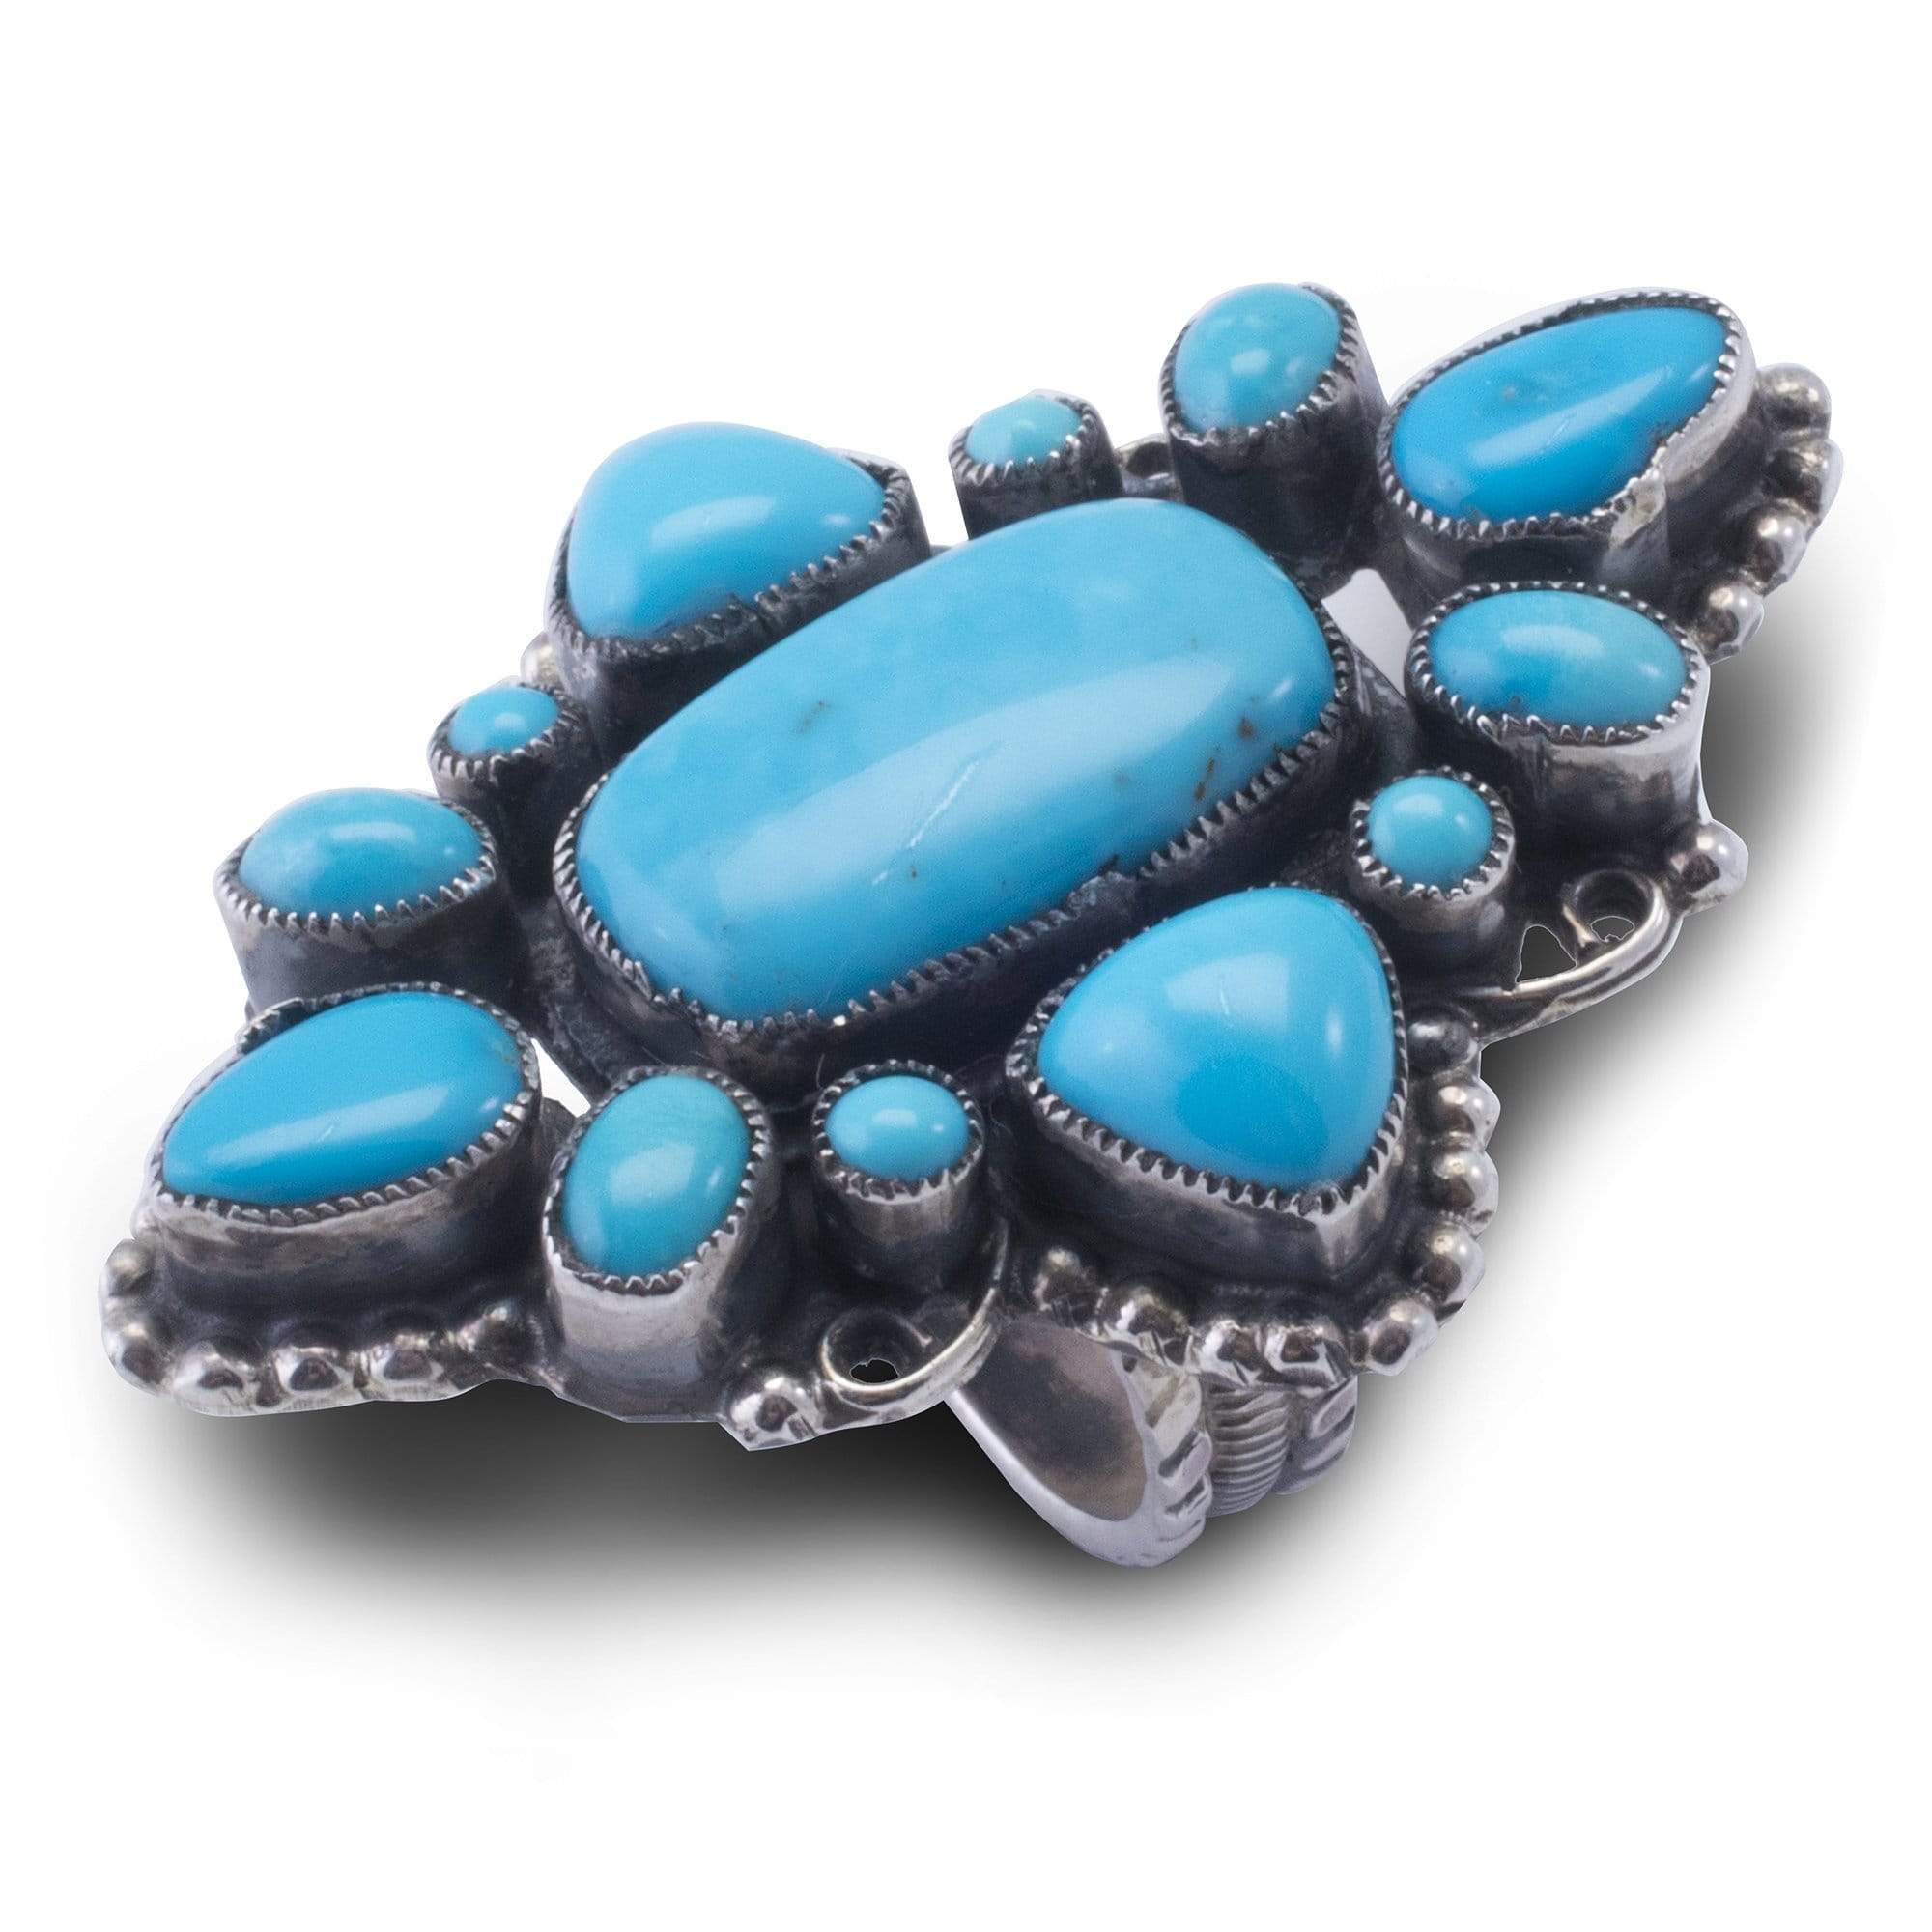 Kalifano Native American Jewelry 7 Leo Feeney Sleeping Beauty Turquoise USA Native American Made 925 Sterling Silver Ring NAR1500.005.7